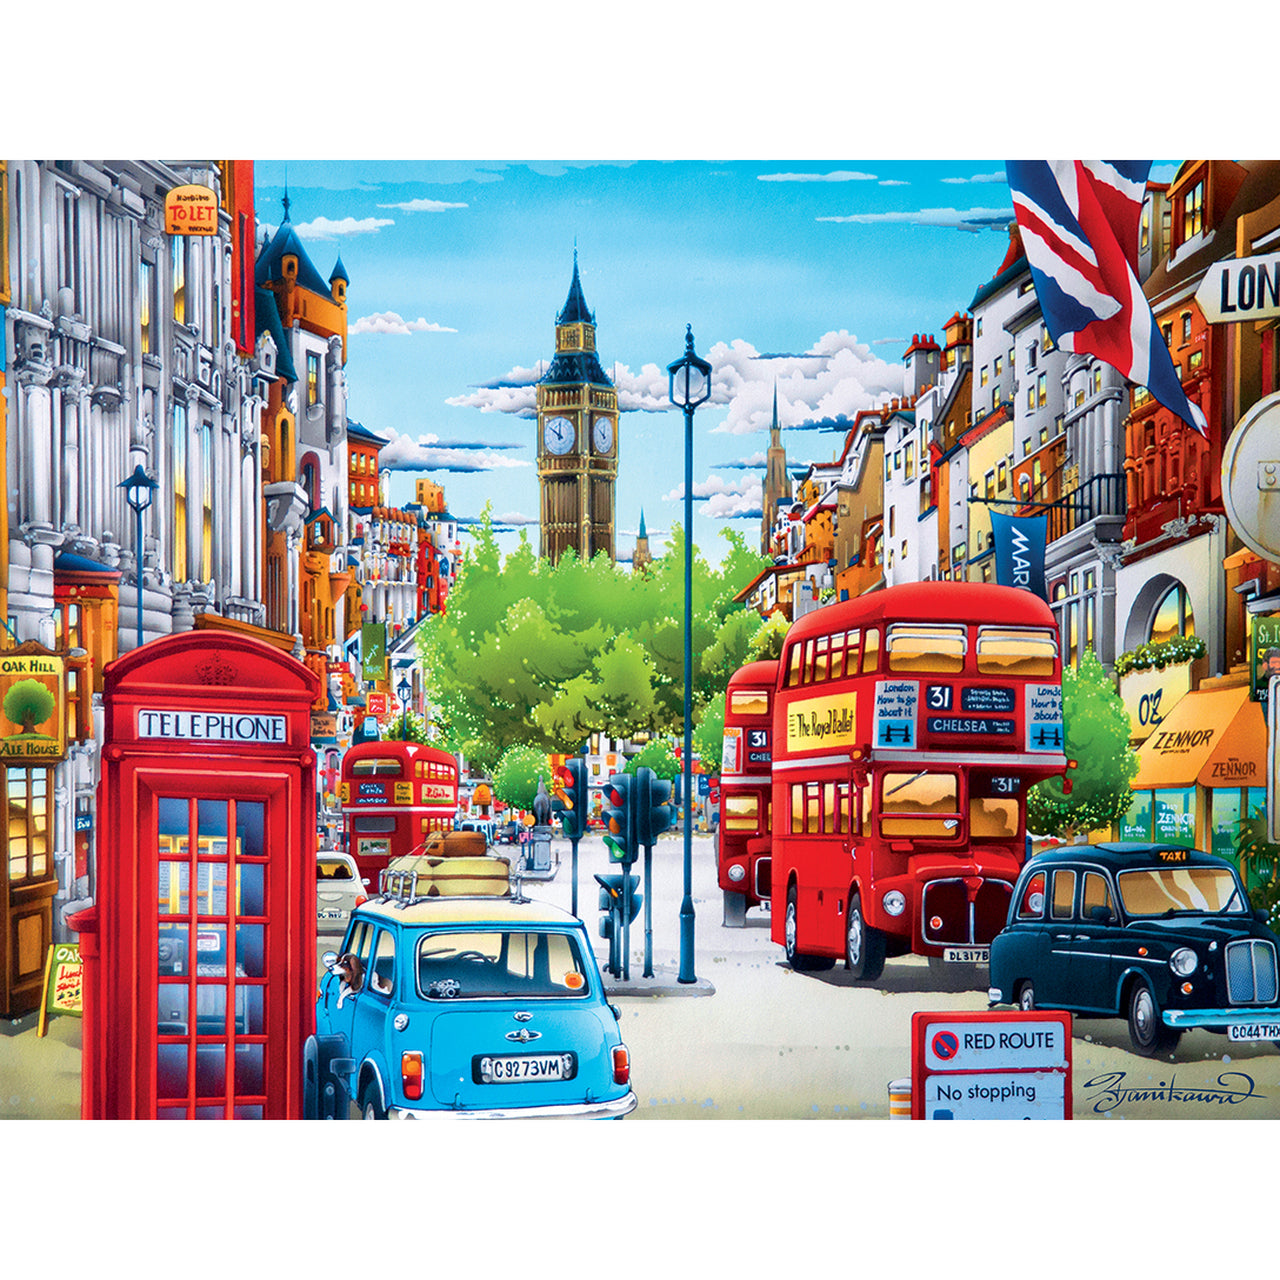 Travel Diary London - 550 Piece Jigsaw Puzzle by Masterpieces